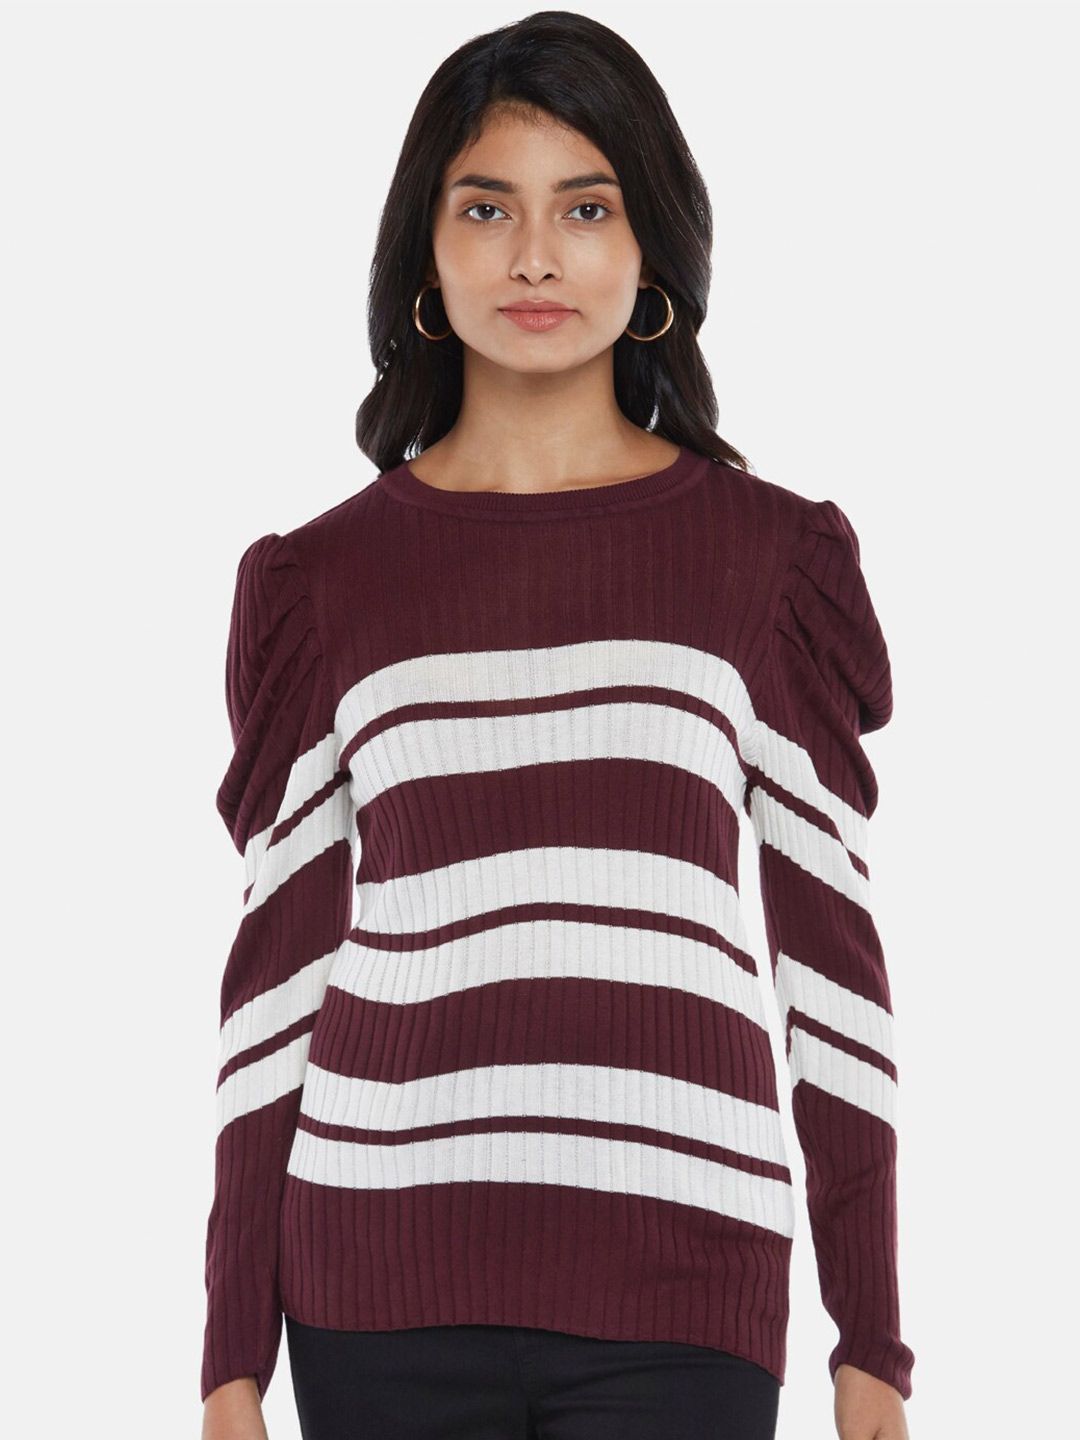 Honey by Pantaloons Women Burgundy & White Striped Pullover Sweater Price in India